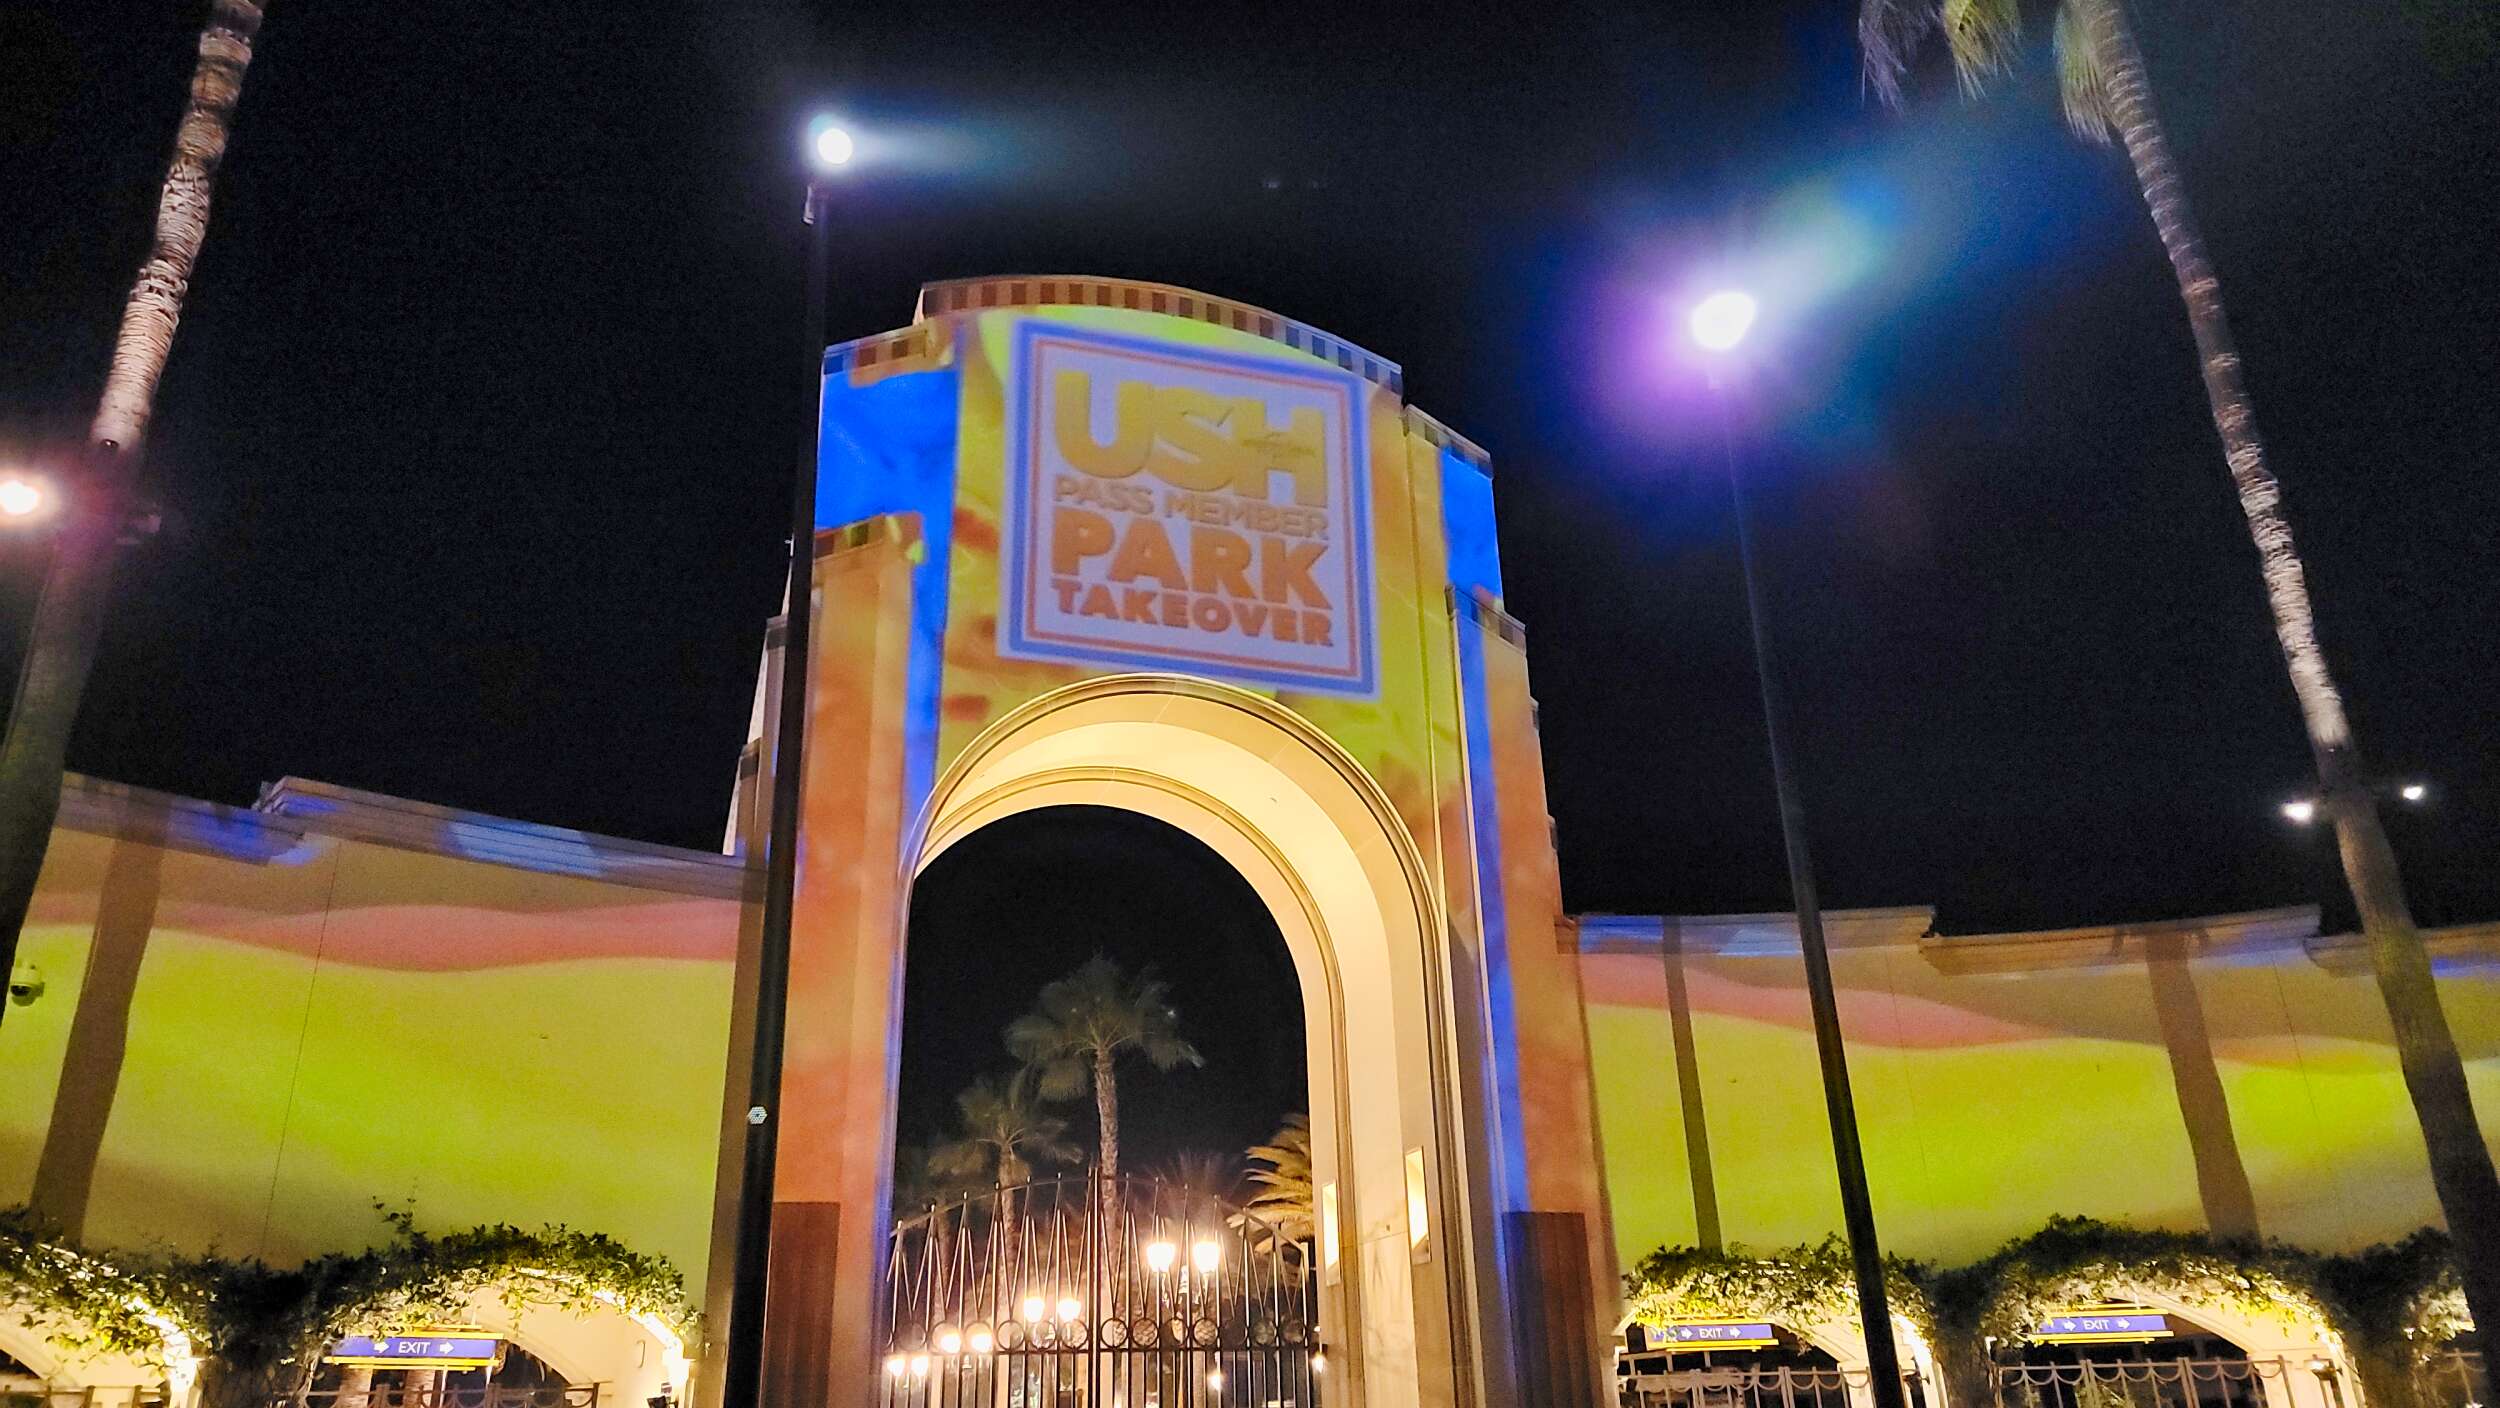 USH Pass Member Park Takeover Night Entrance arch projection